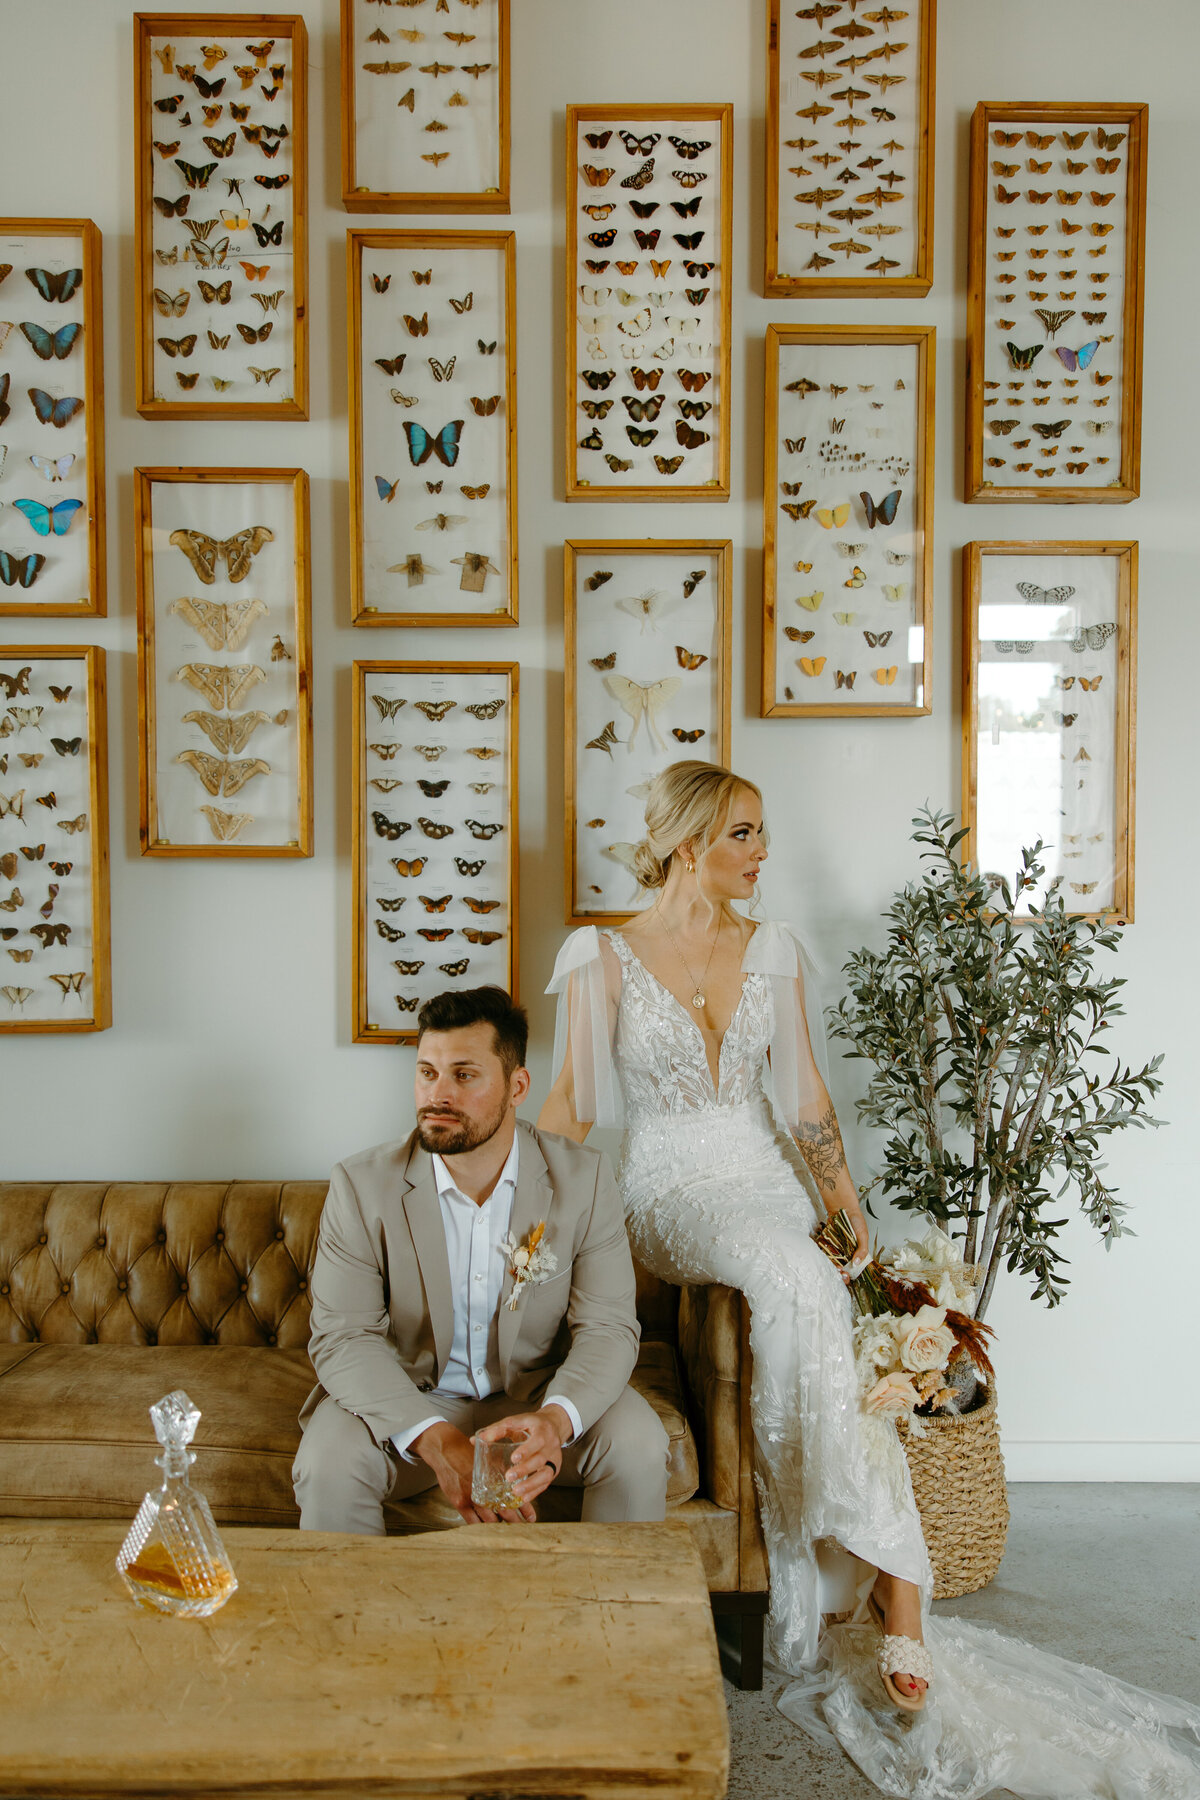 Bride and groom posing on a neutral colored couch with butterfly photos in the background